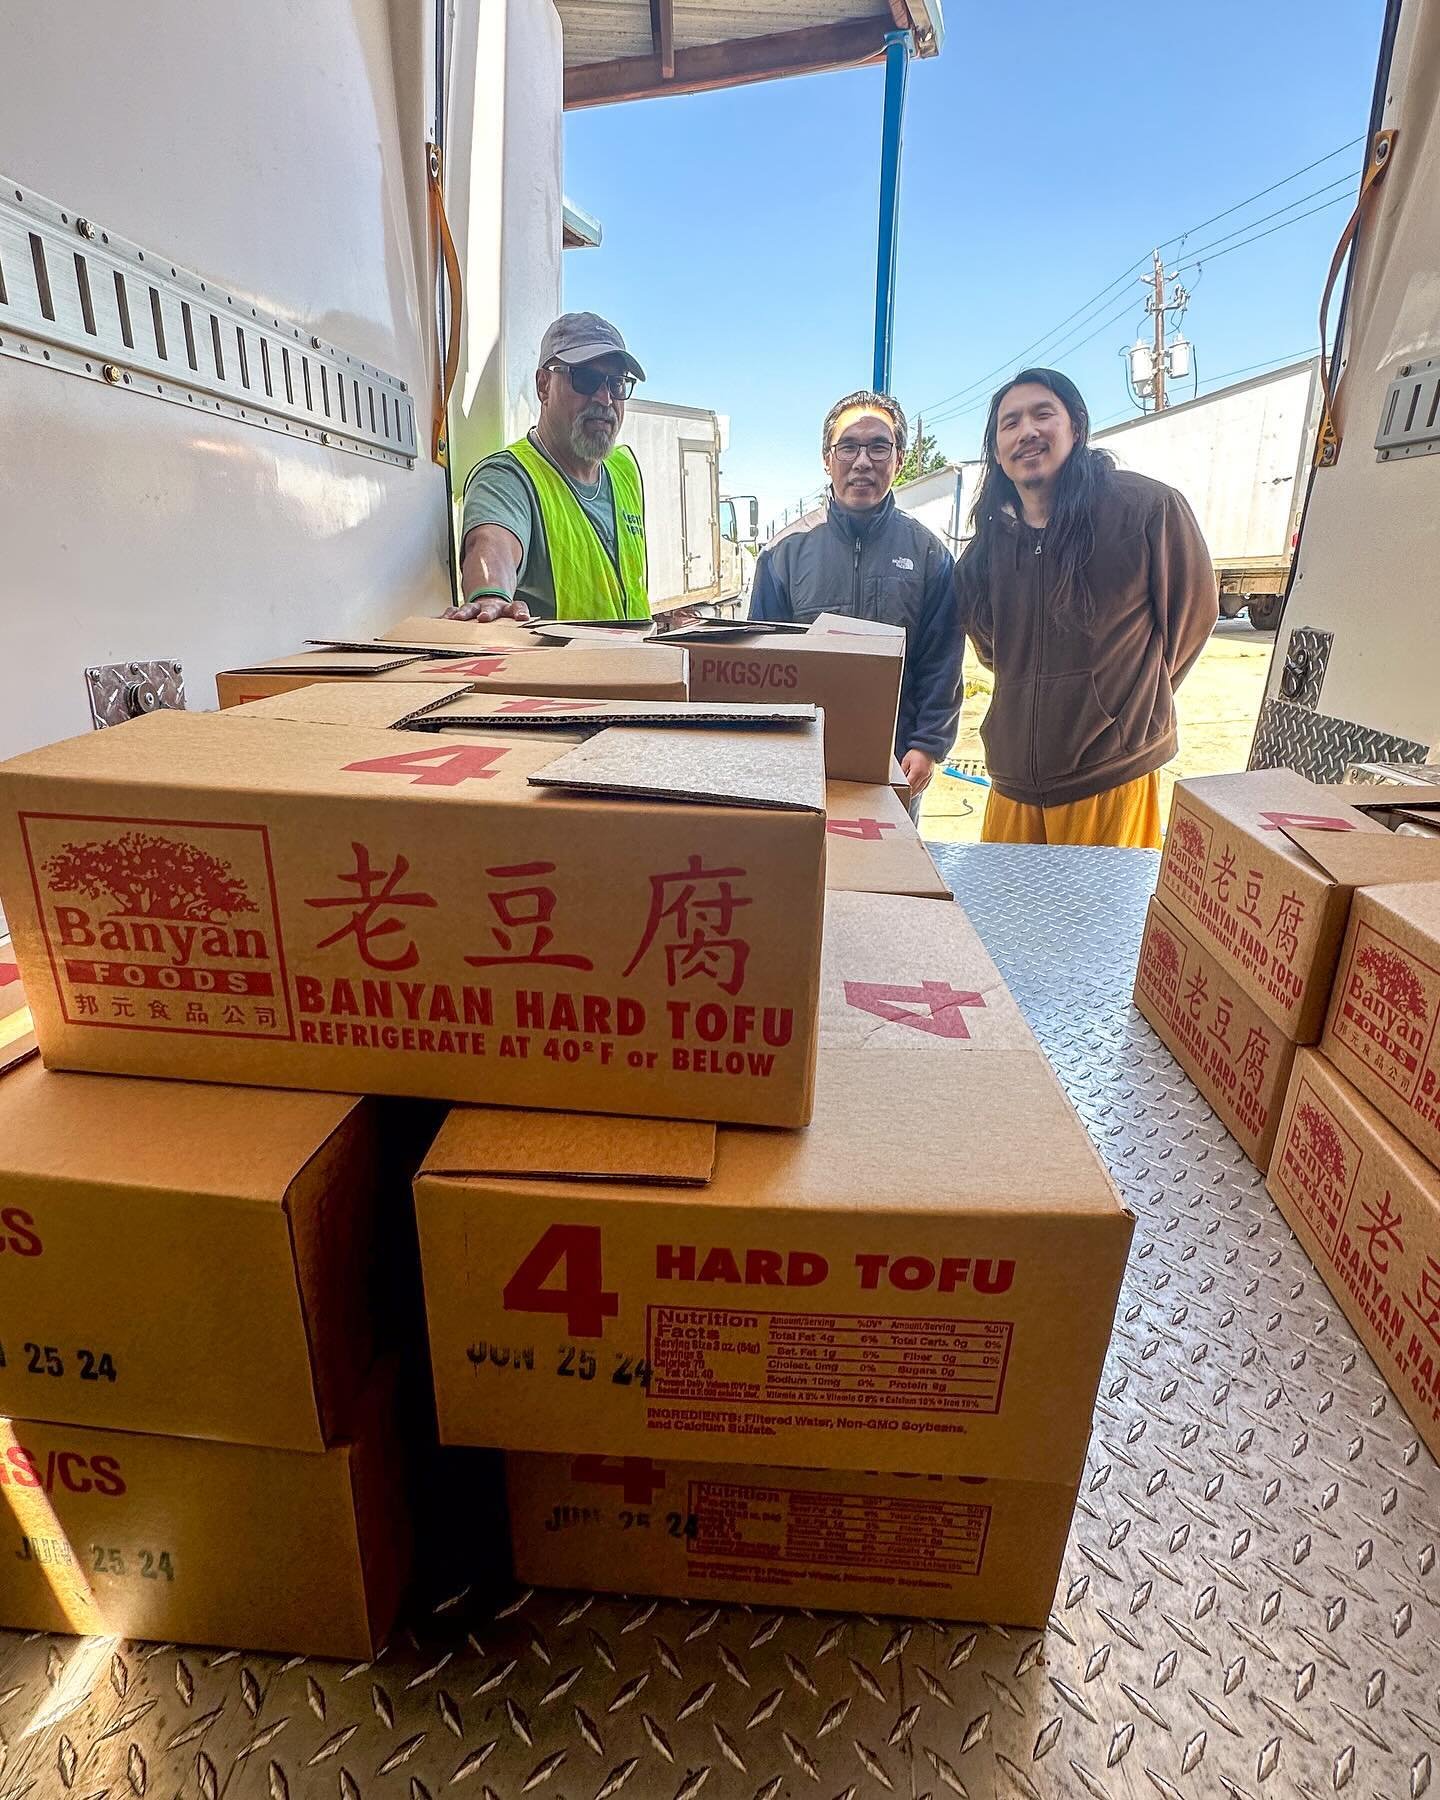 🎉 Exciting news! Second Servings is teaming up with @banyanfoods to enrich grocery drop-offs to nonprofit partners serving culturally diverse communities, such as Woori Juntos 우리 훈또스, a Korean Community Center in Spring Branch. With Banyan Foods on 